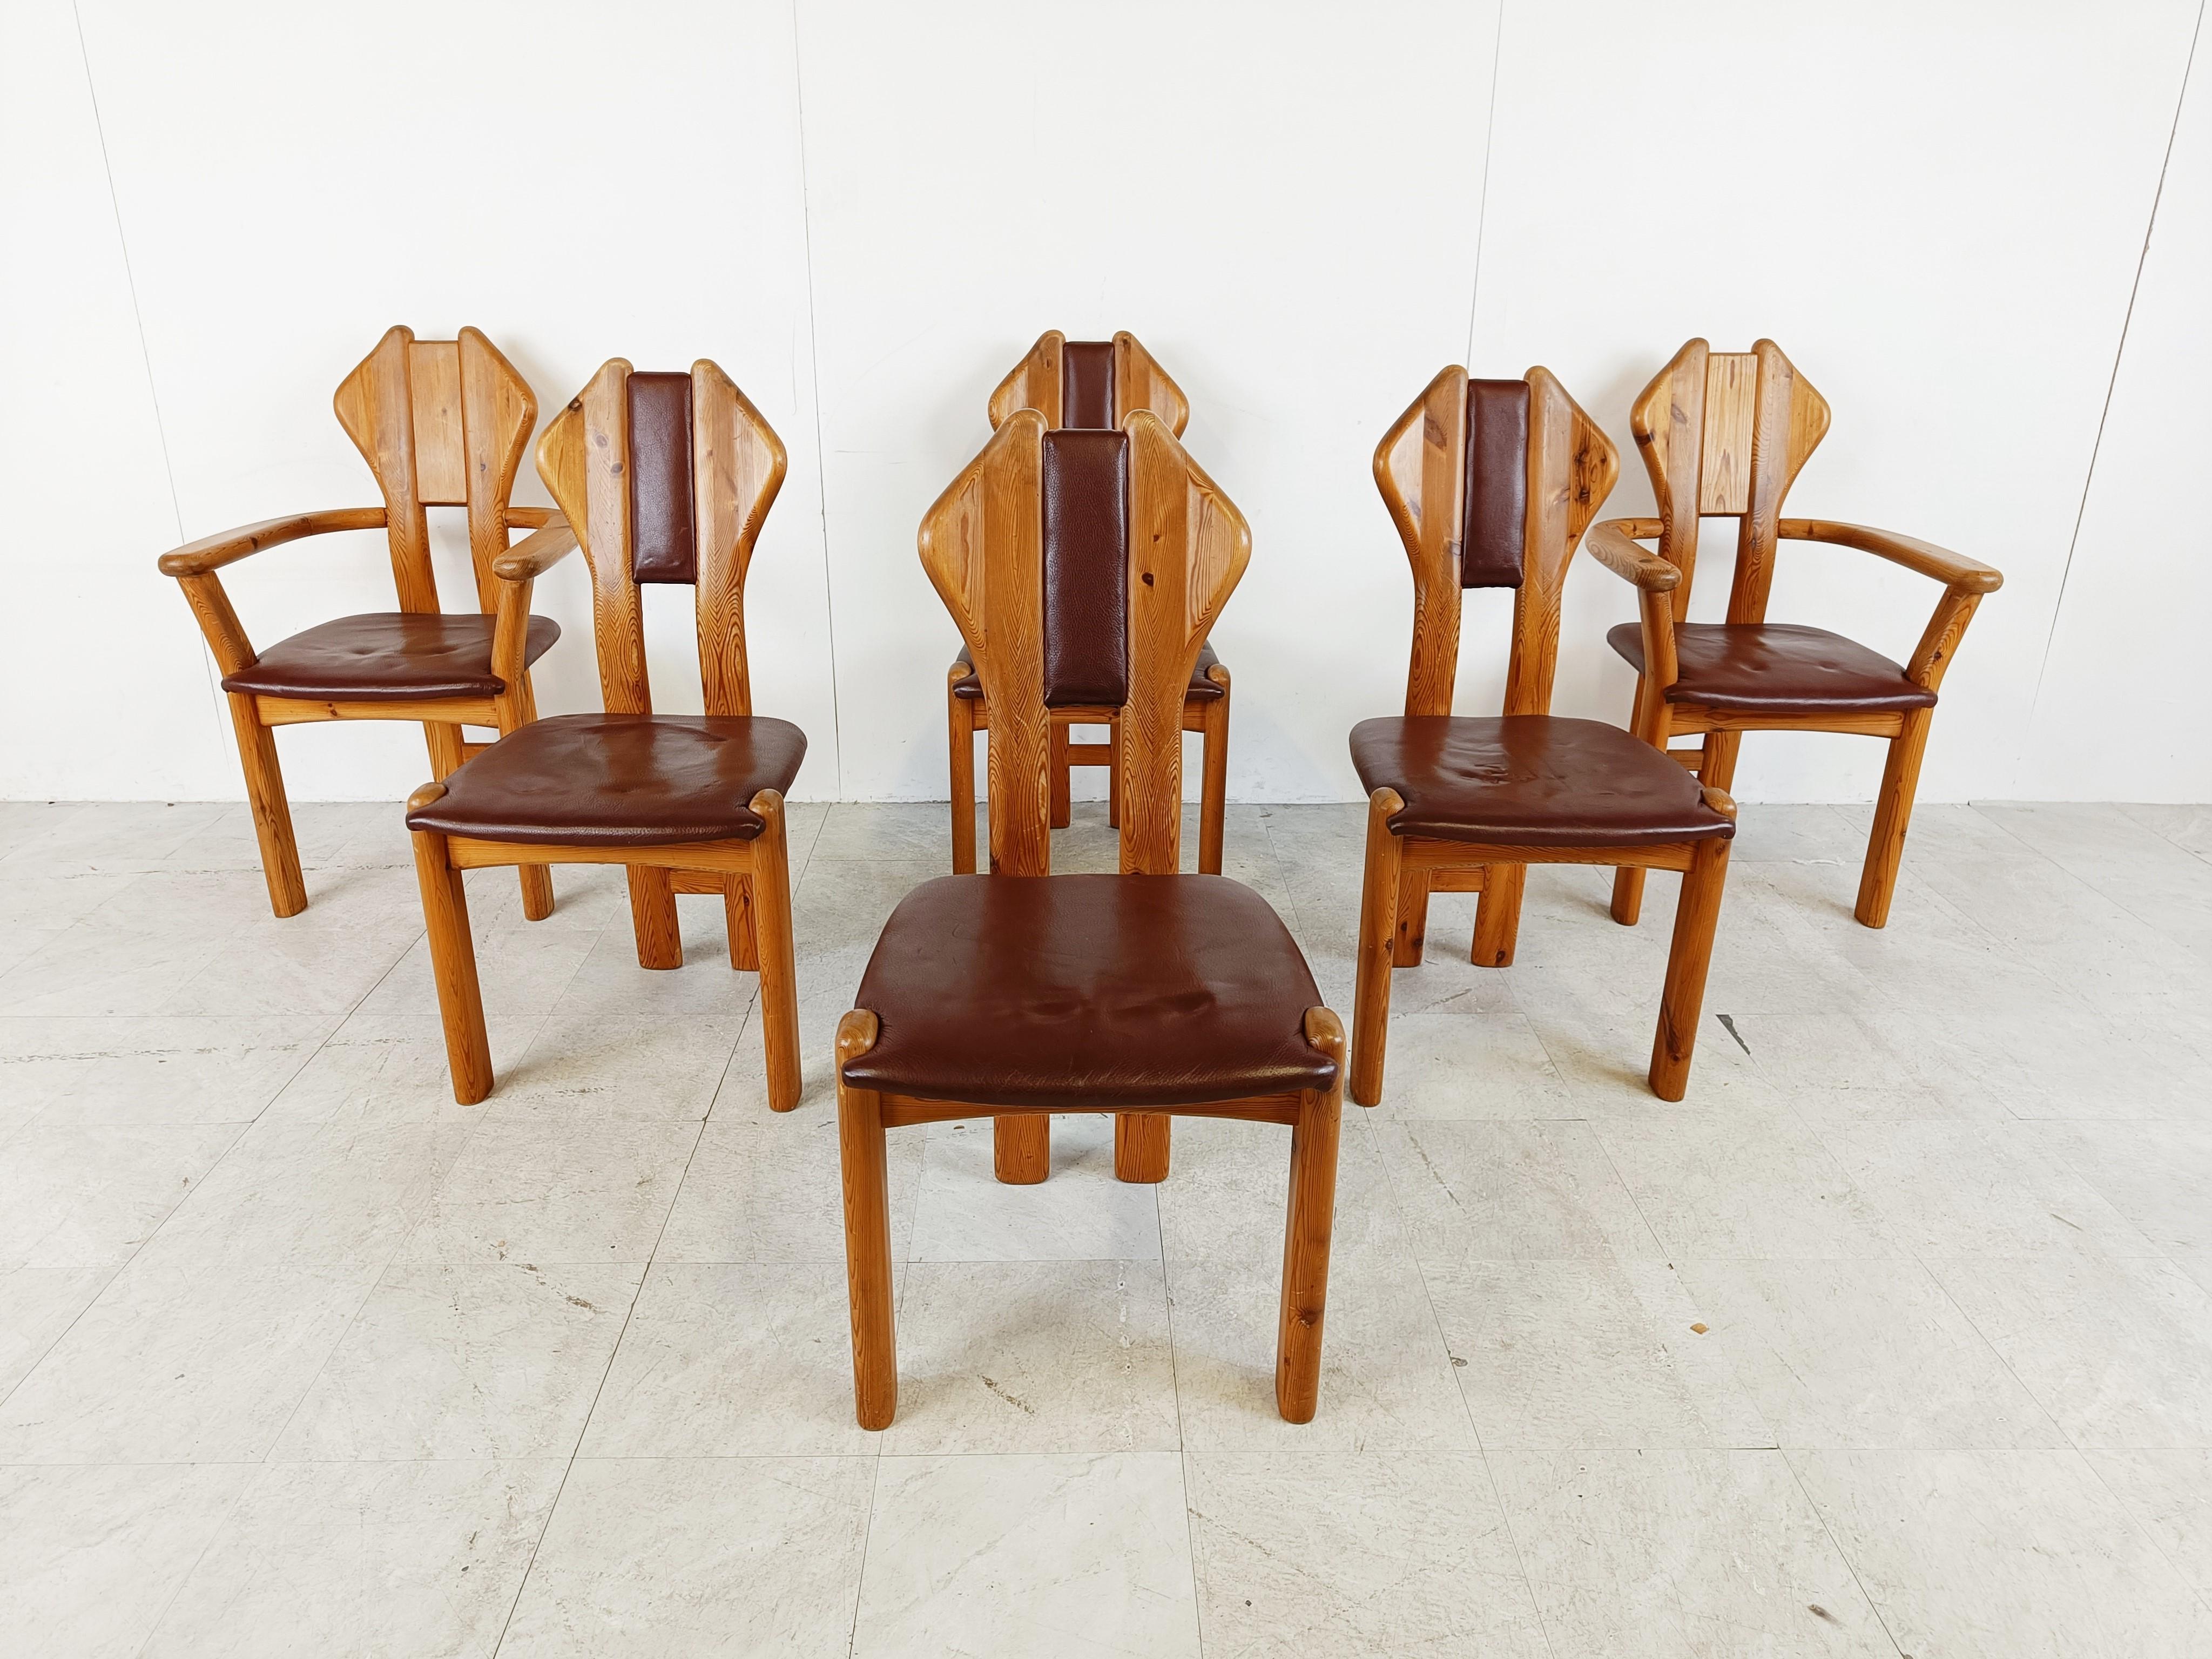 Vintage pine wood dining chairs with brown leather insert on the backrest and brown leather seat.

Nice and solid chairs.

Timeless and can be combined in lots of interiors.

Good condition

1970s - Denmark 

Dimensions:
Height: